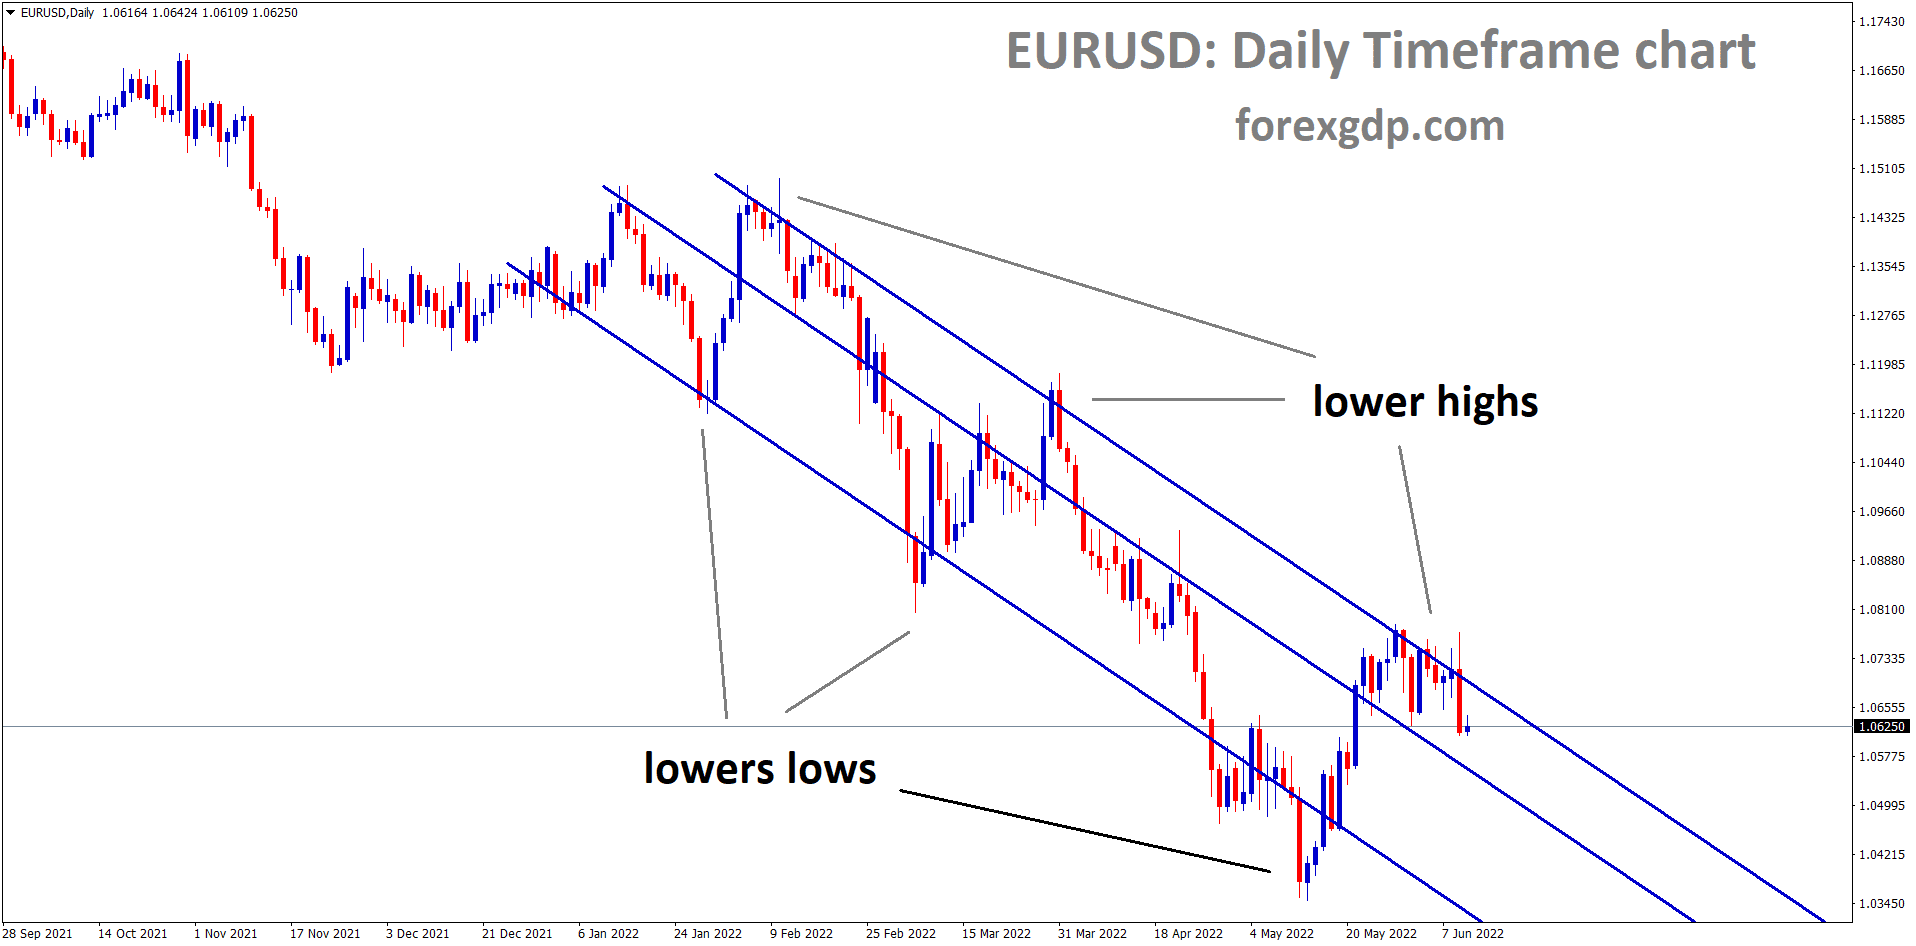 EURUSD daily timeframe chart is in a downtrend after facing ECB interest rate decision